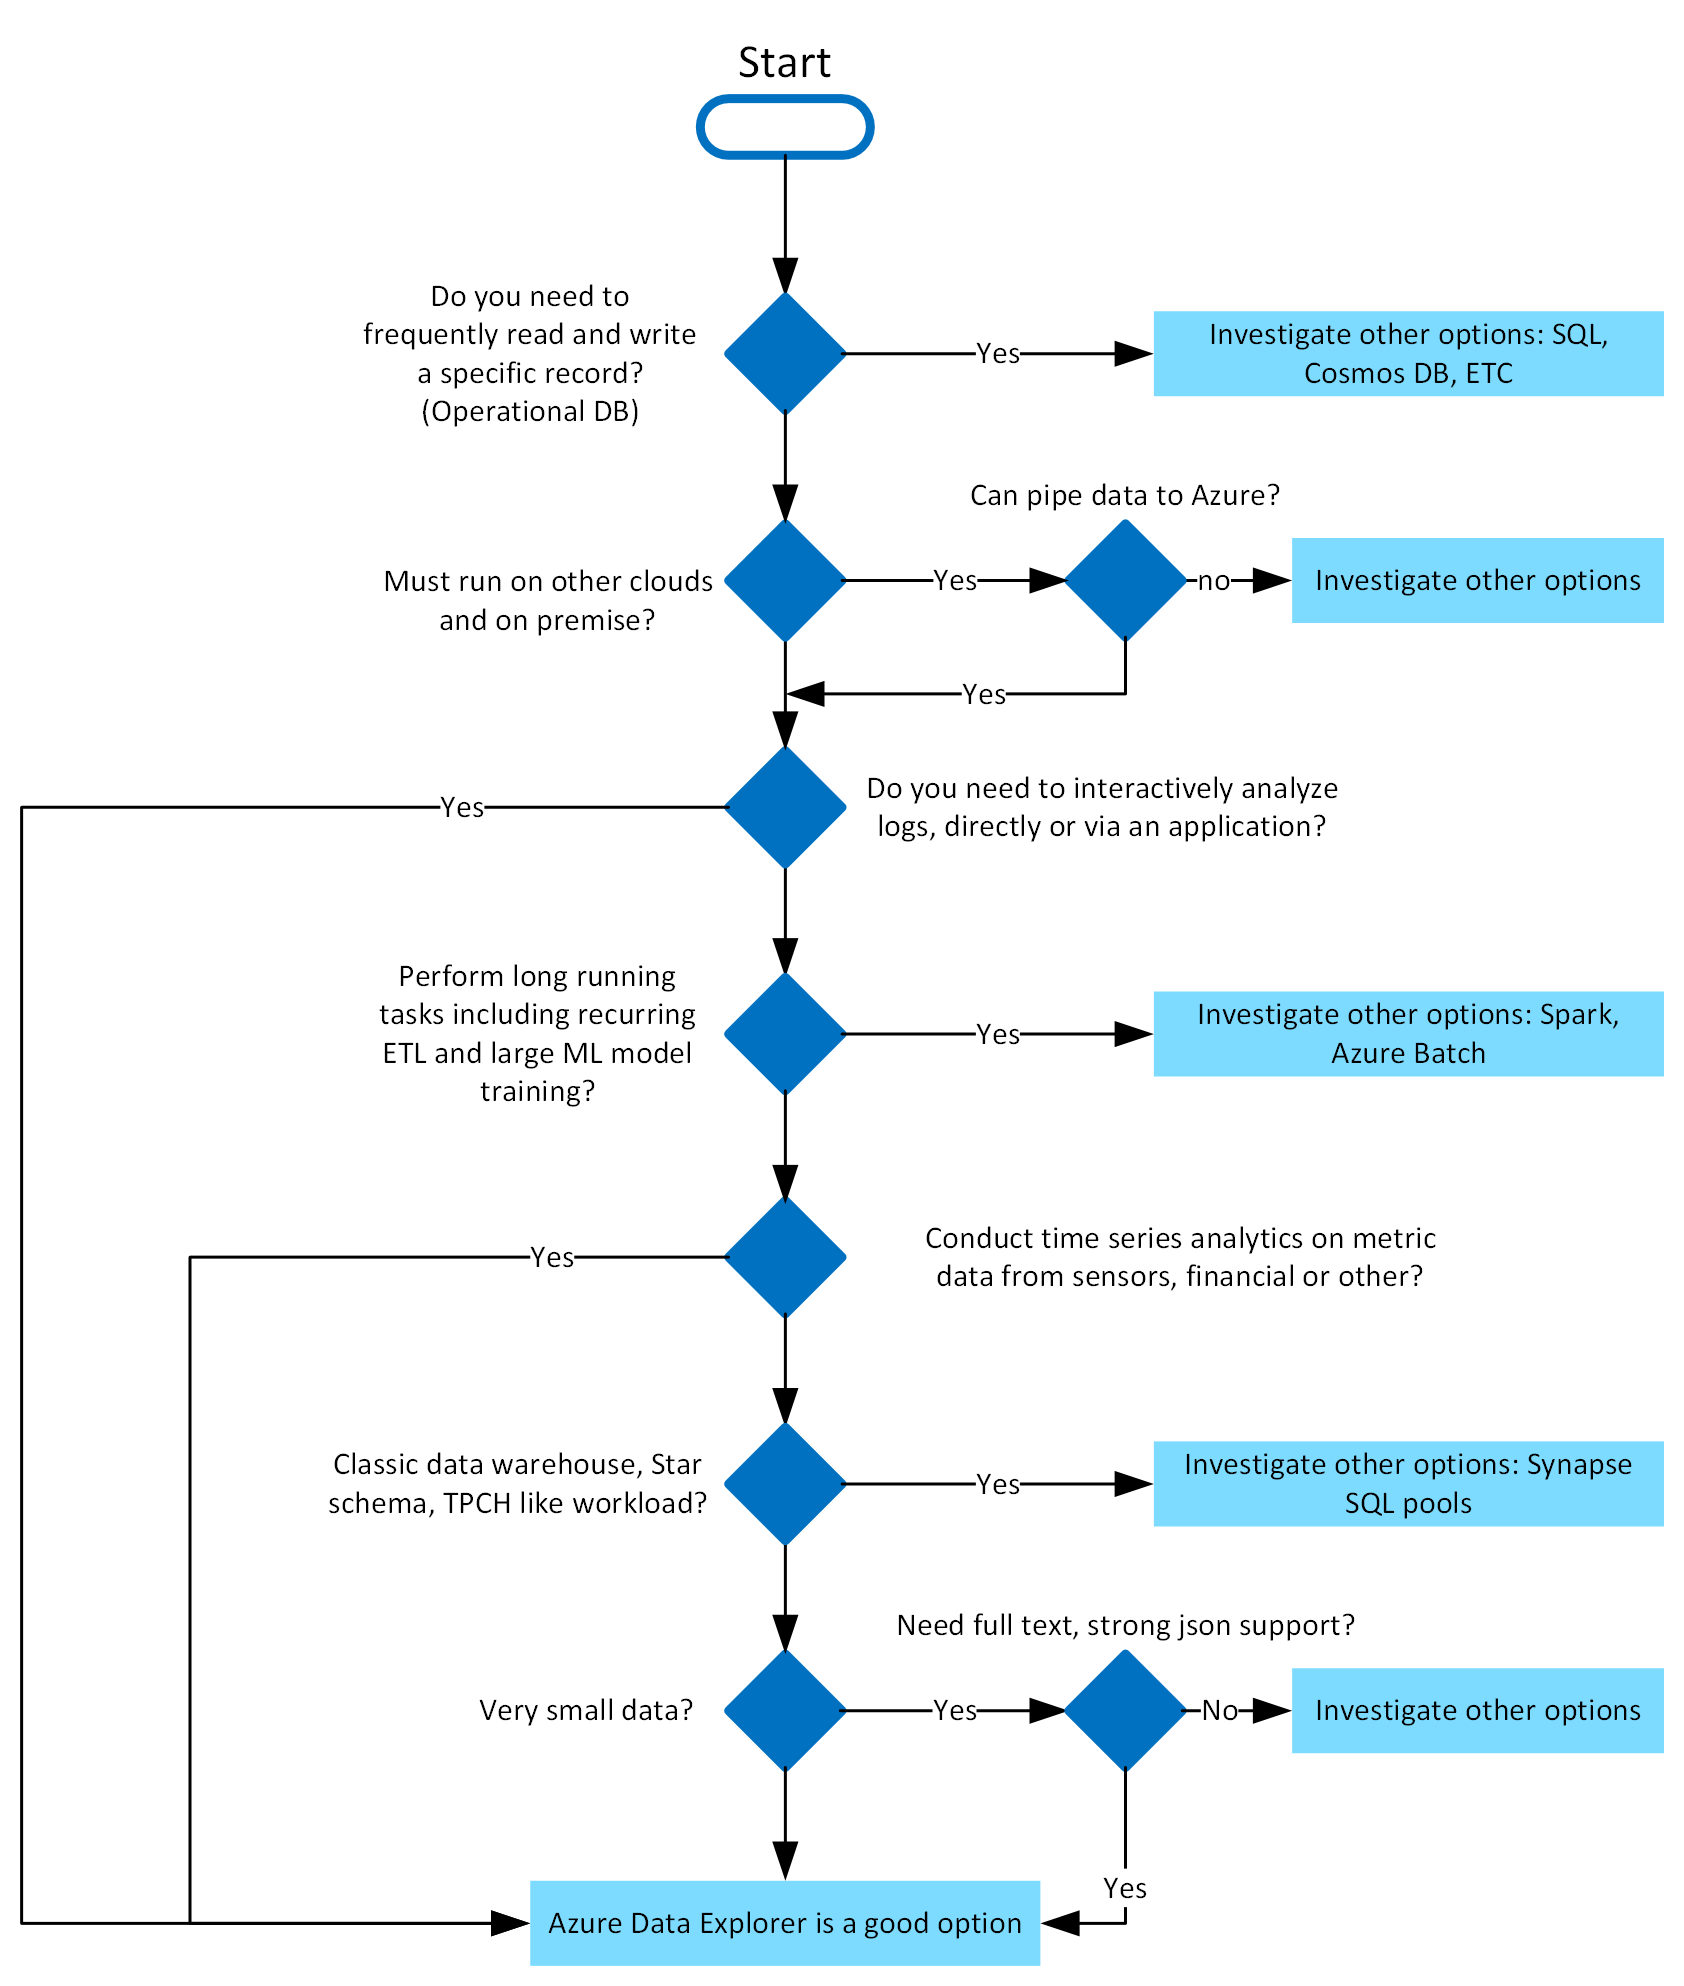 This image is a schematic workflow image of an Azure Data Explorer decision tree.